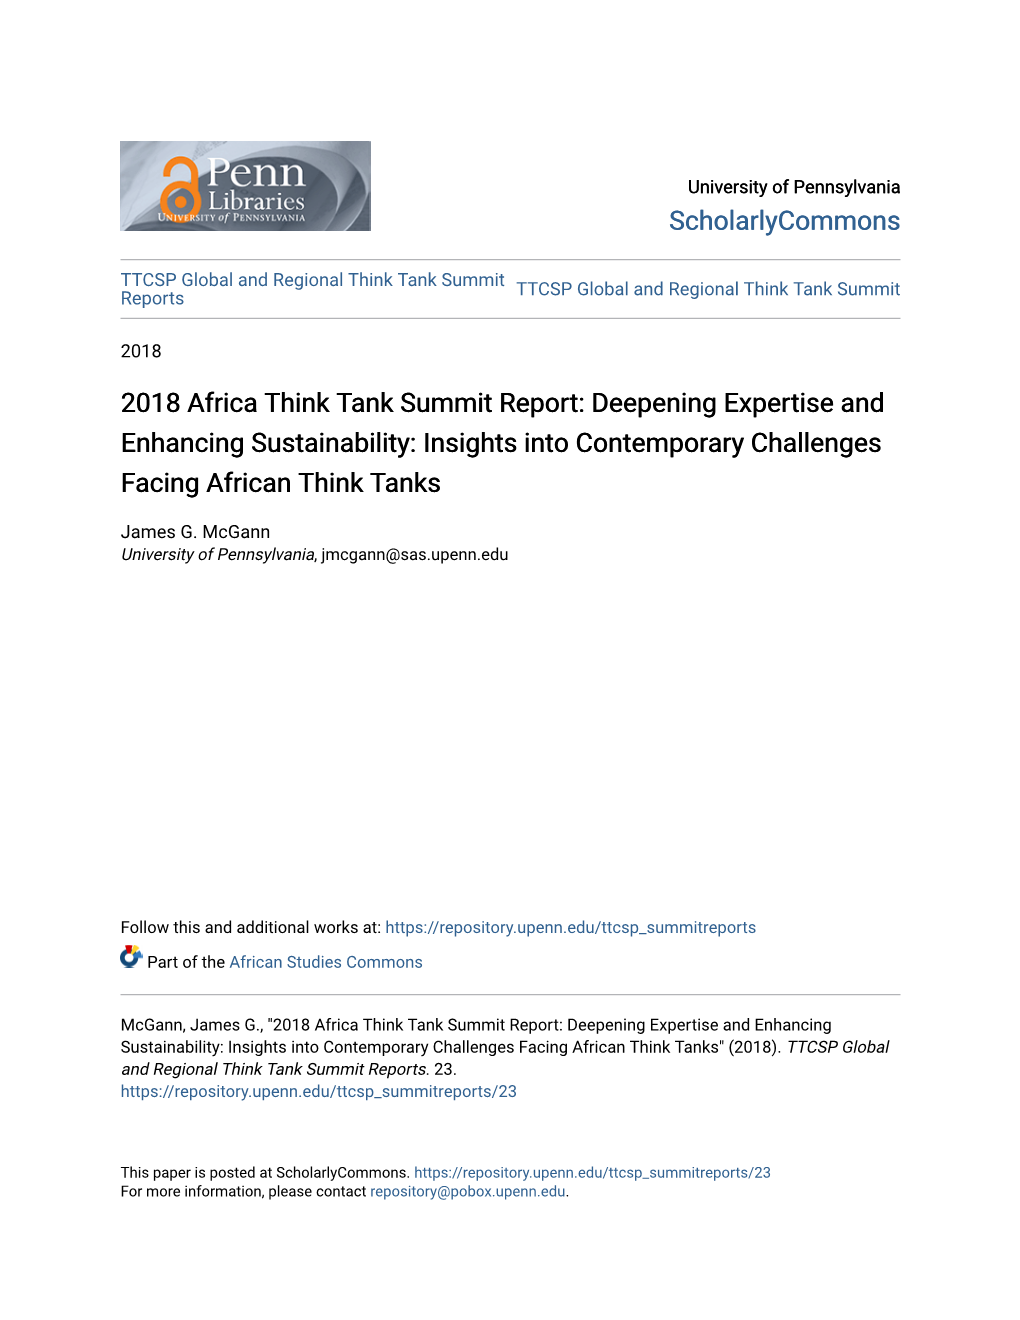 2018 Africa Think Tank Summit Report: Deepening Expertise and Enhancing Sustainability: Insights Into Contemporary Challenges Facing African Think Tanks